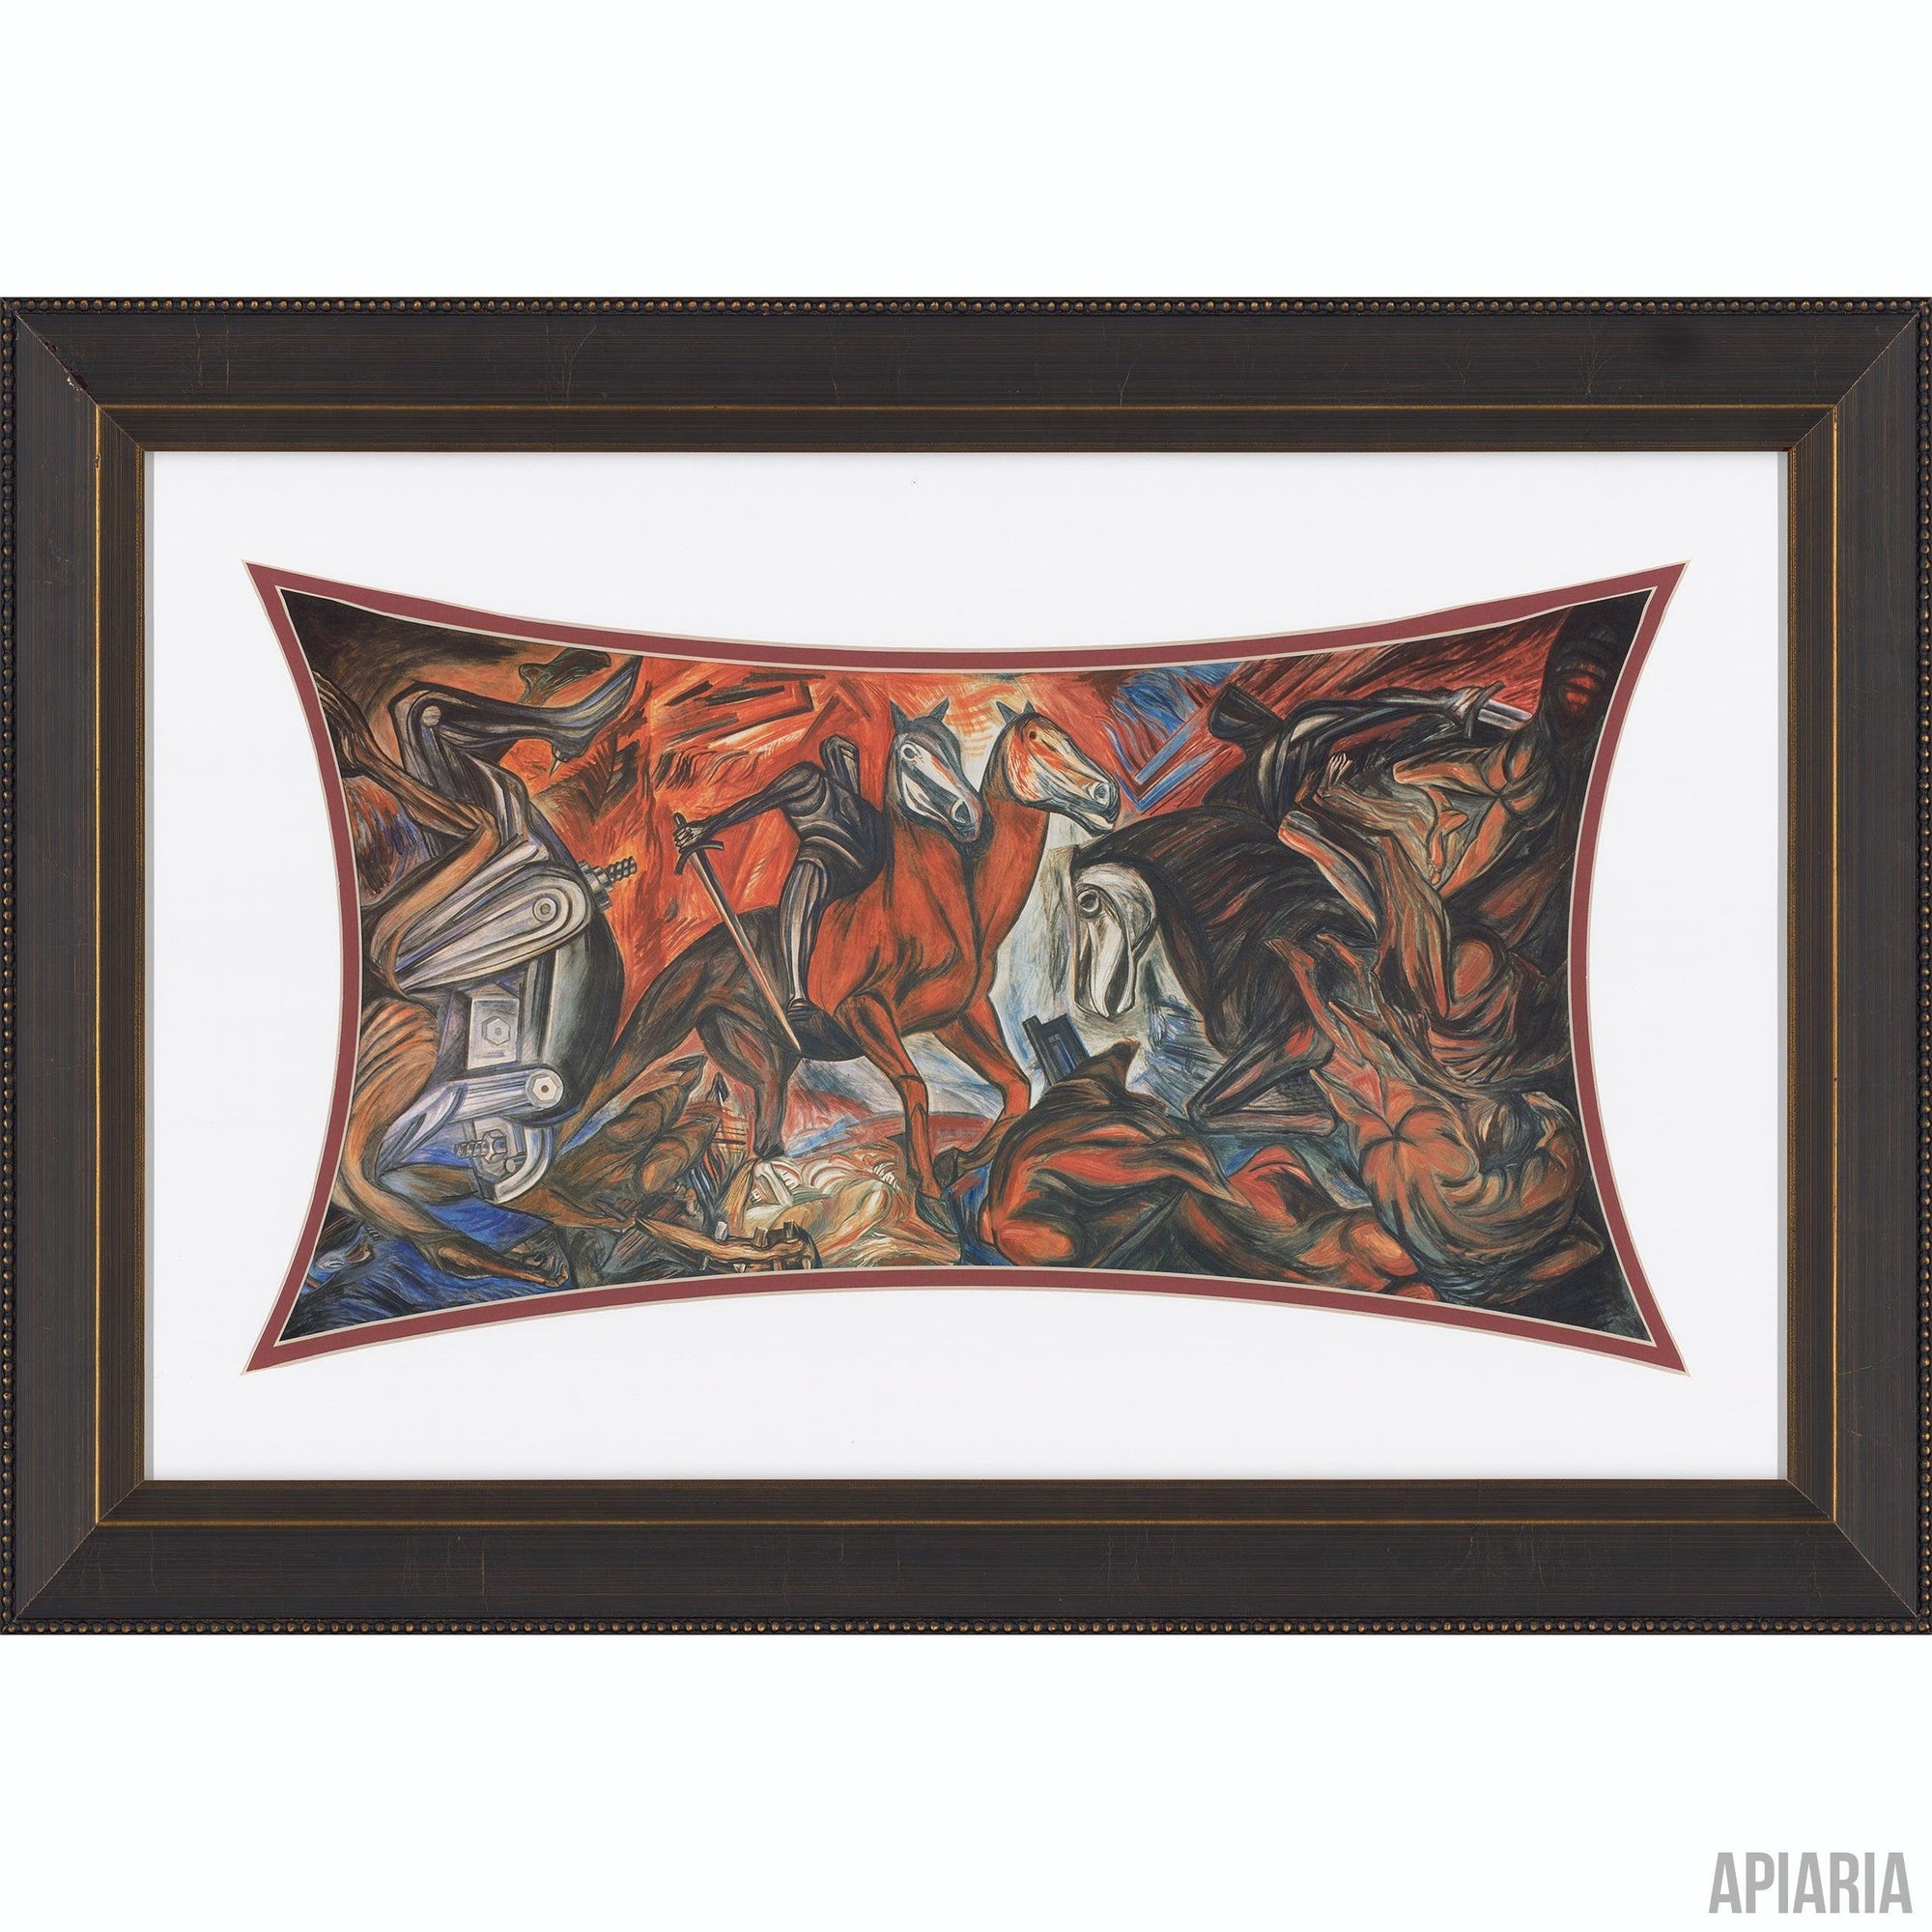 José Clemente Orozco "The Two Headed Horse"-Framed Art-Apiaria